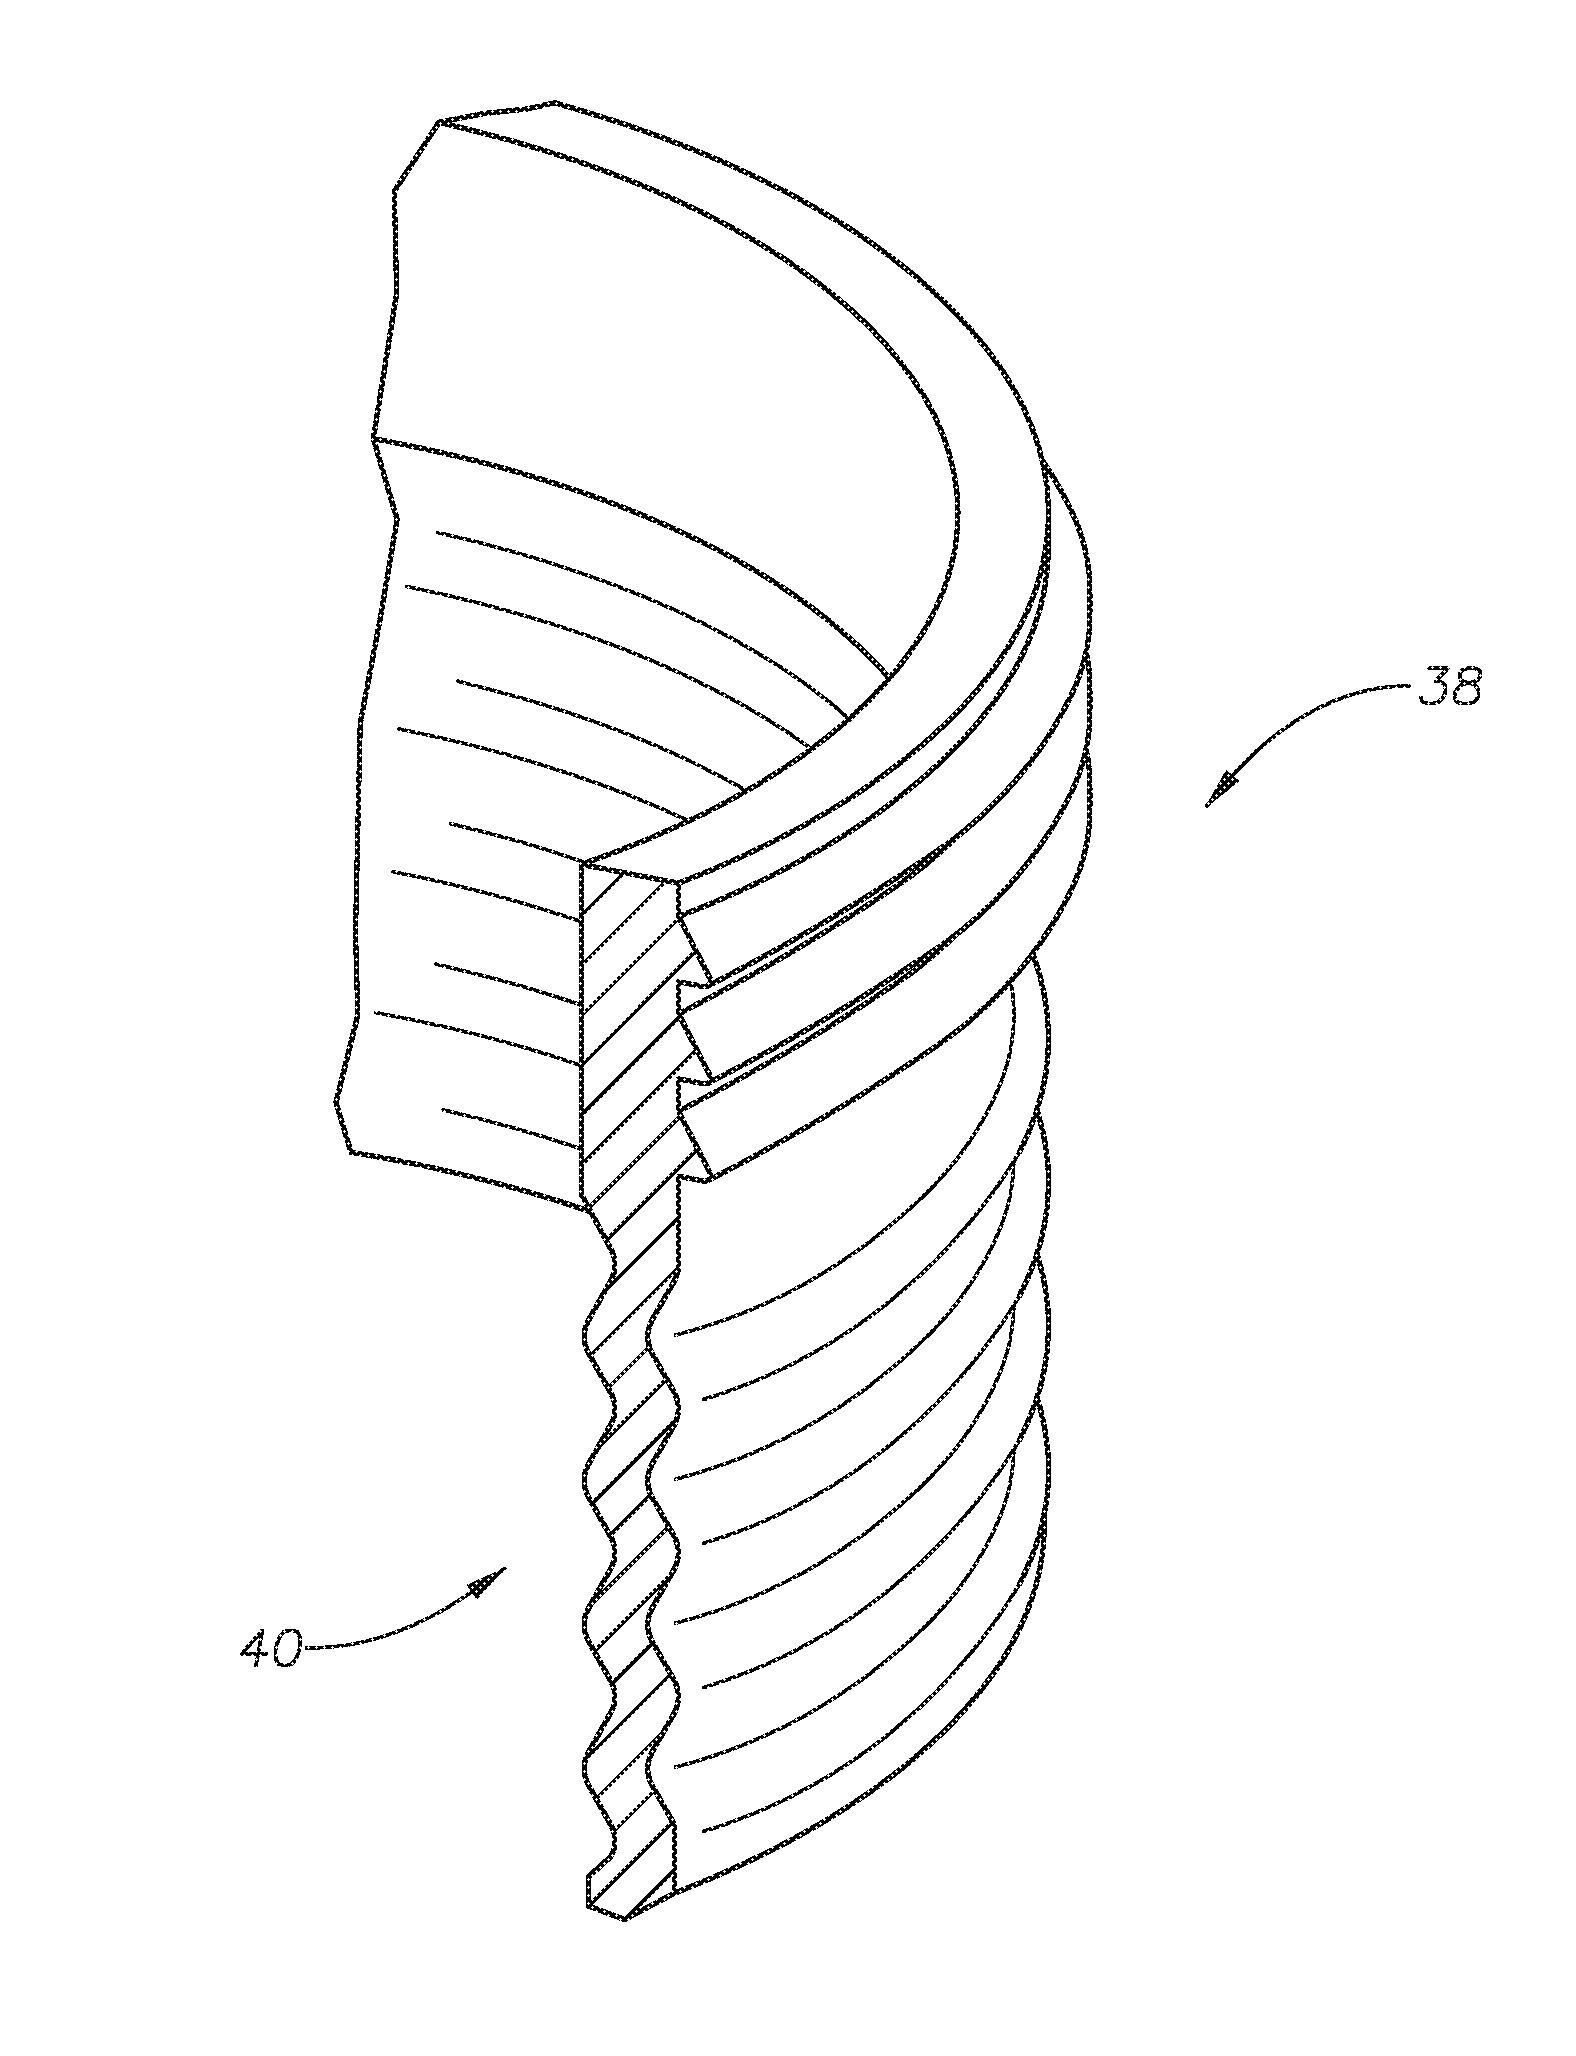 Corrugated energizing ring for use with a split lockdown ring